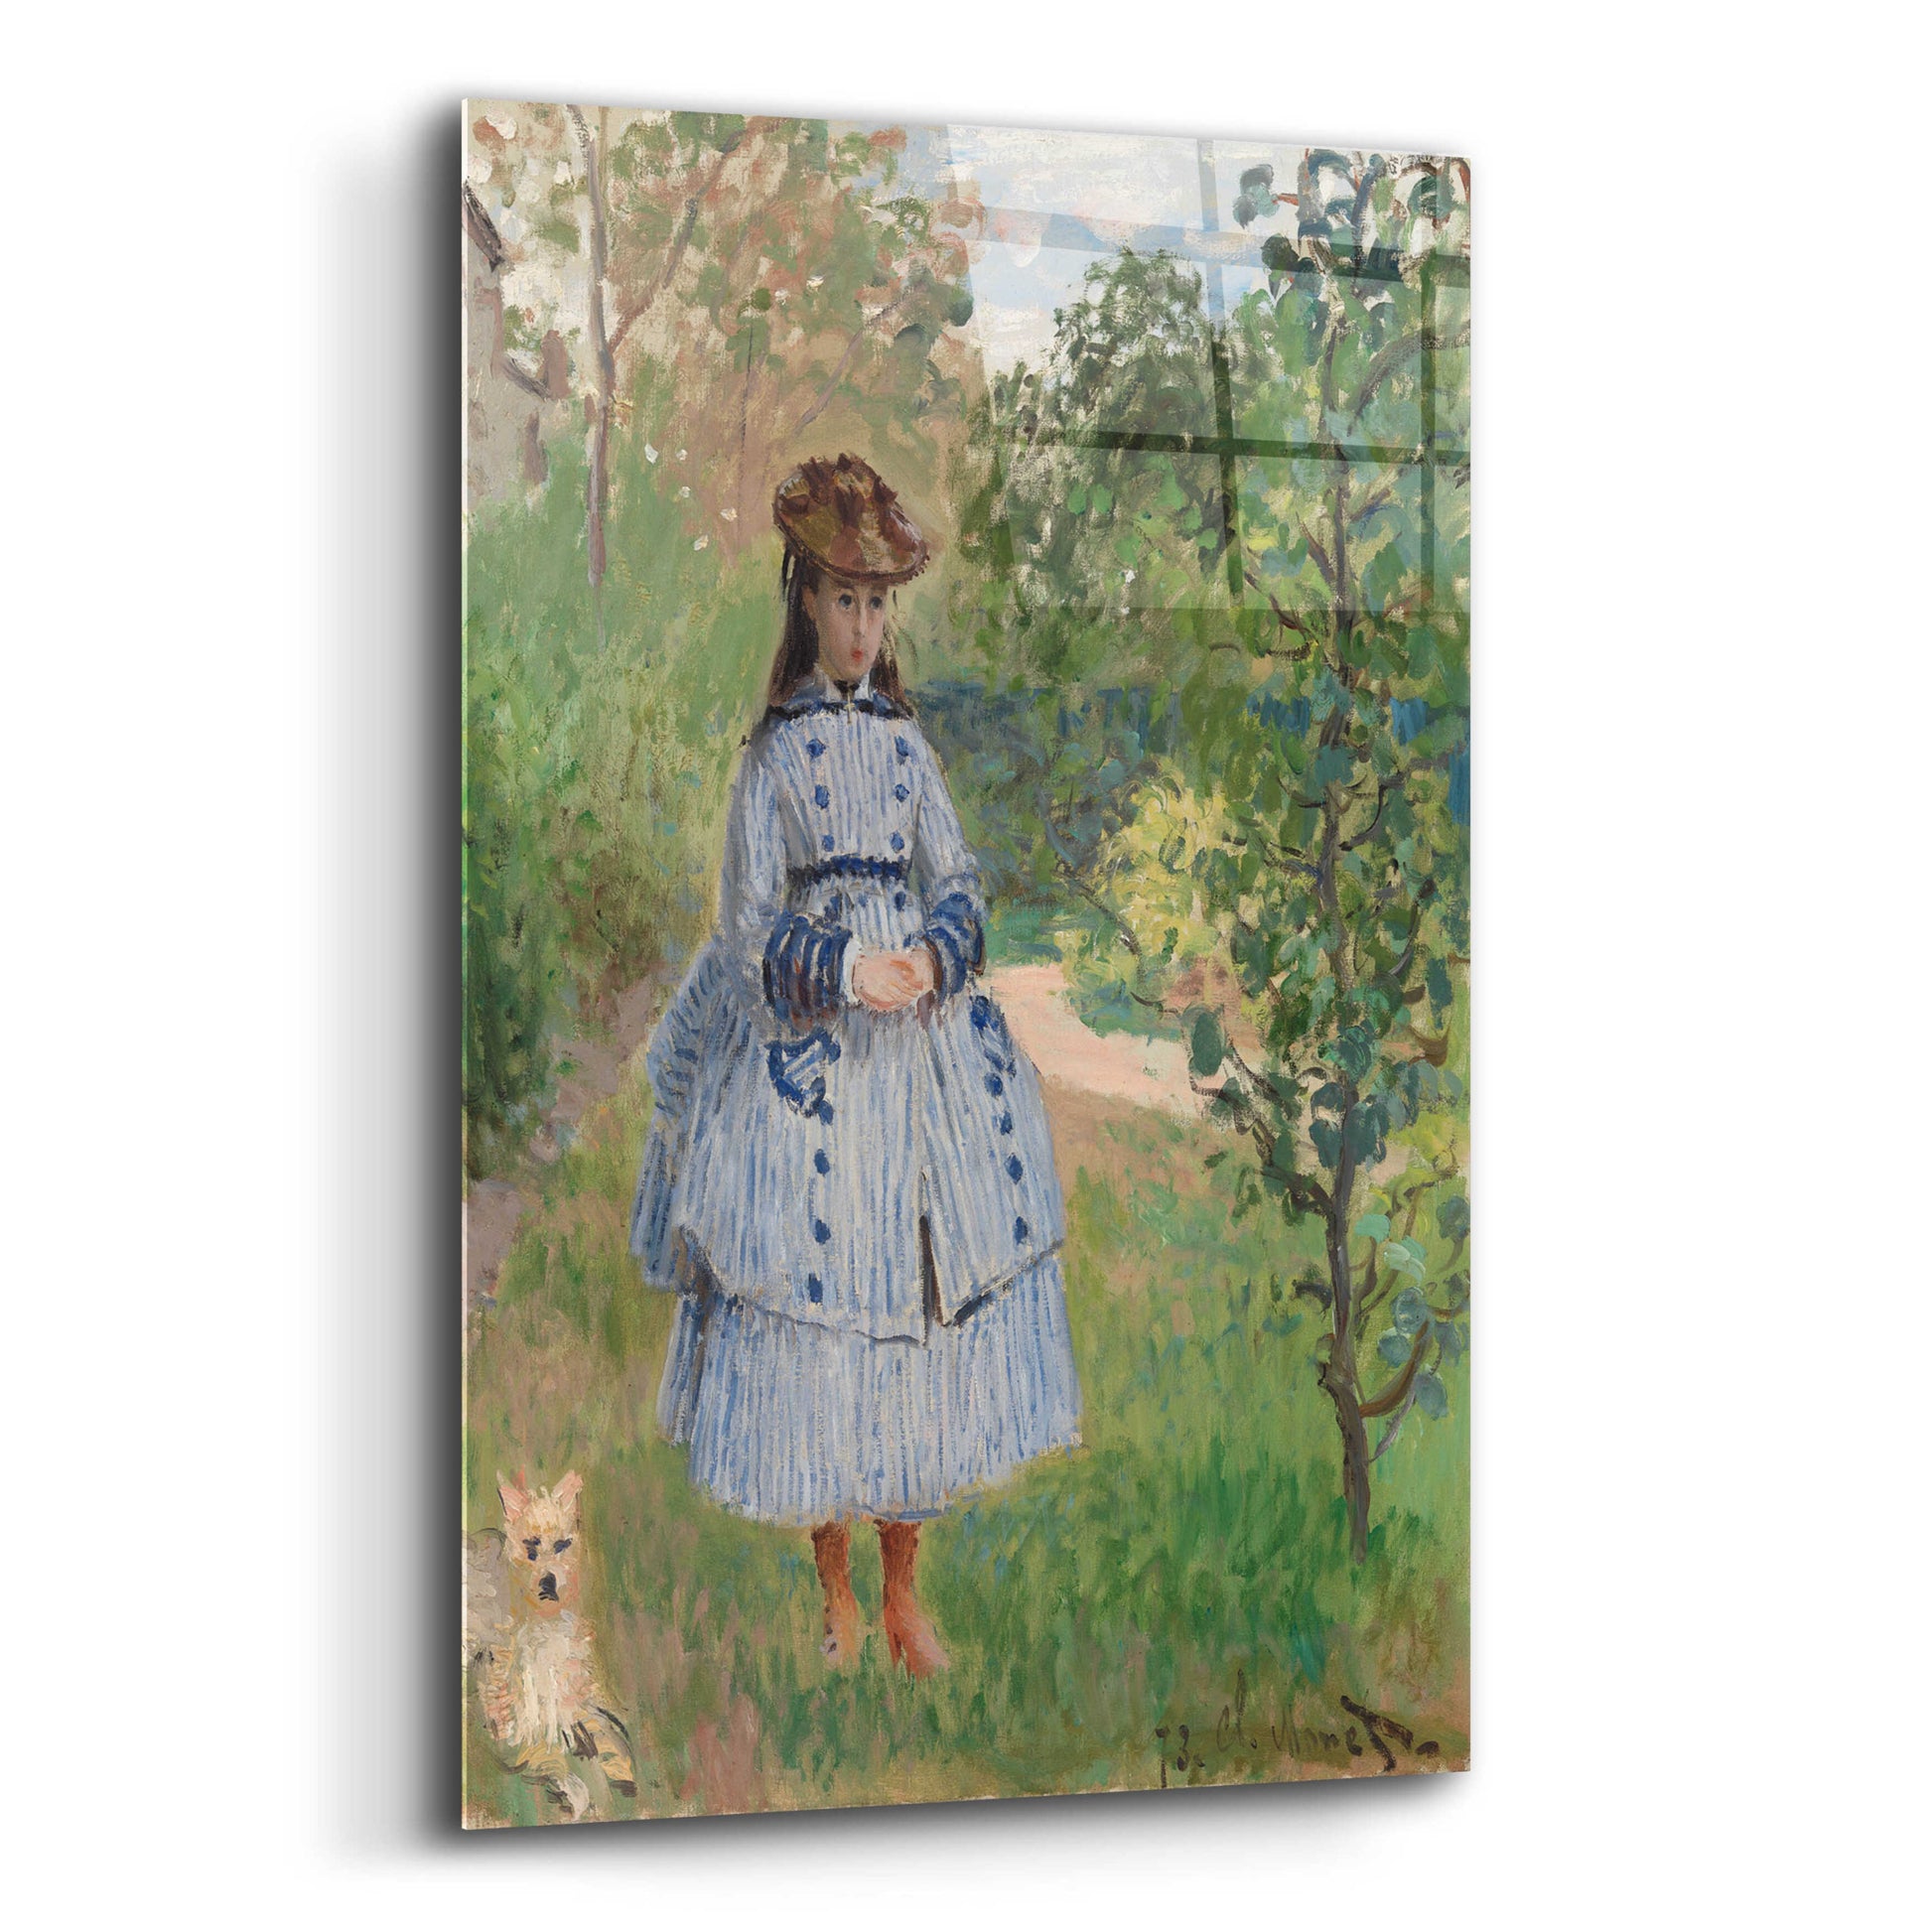 Epic Art 'Girl With Dog' by Claude Monet, Acrylic Glass Wall Art,12x16